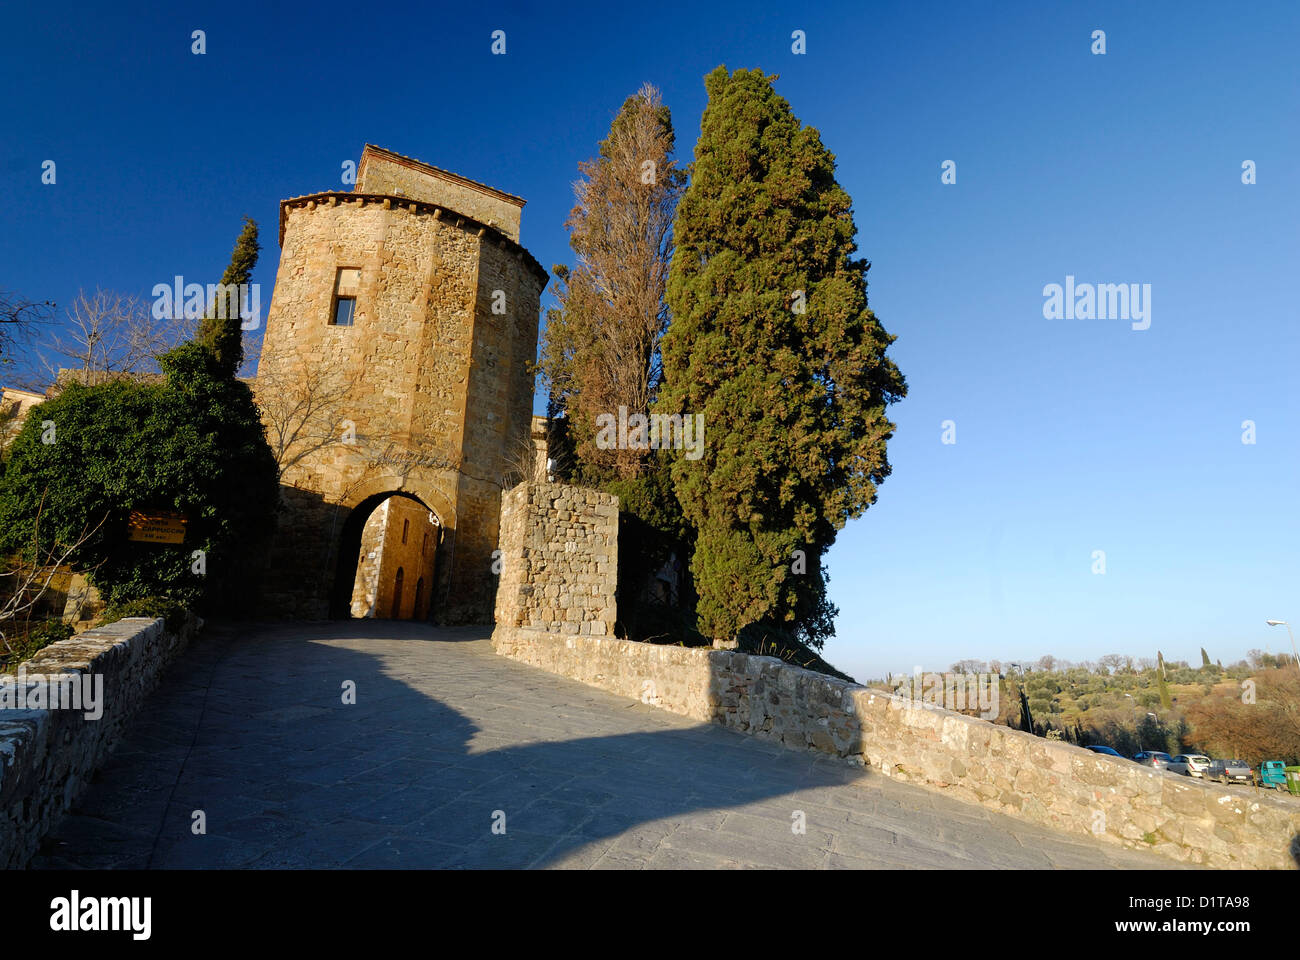 Ancient Door of San Quirico d'Orcia, Val d'Orcia, Tuscany, Siena, Italy Roberto Nistri landscapes landscape horizontal Stock Photo